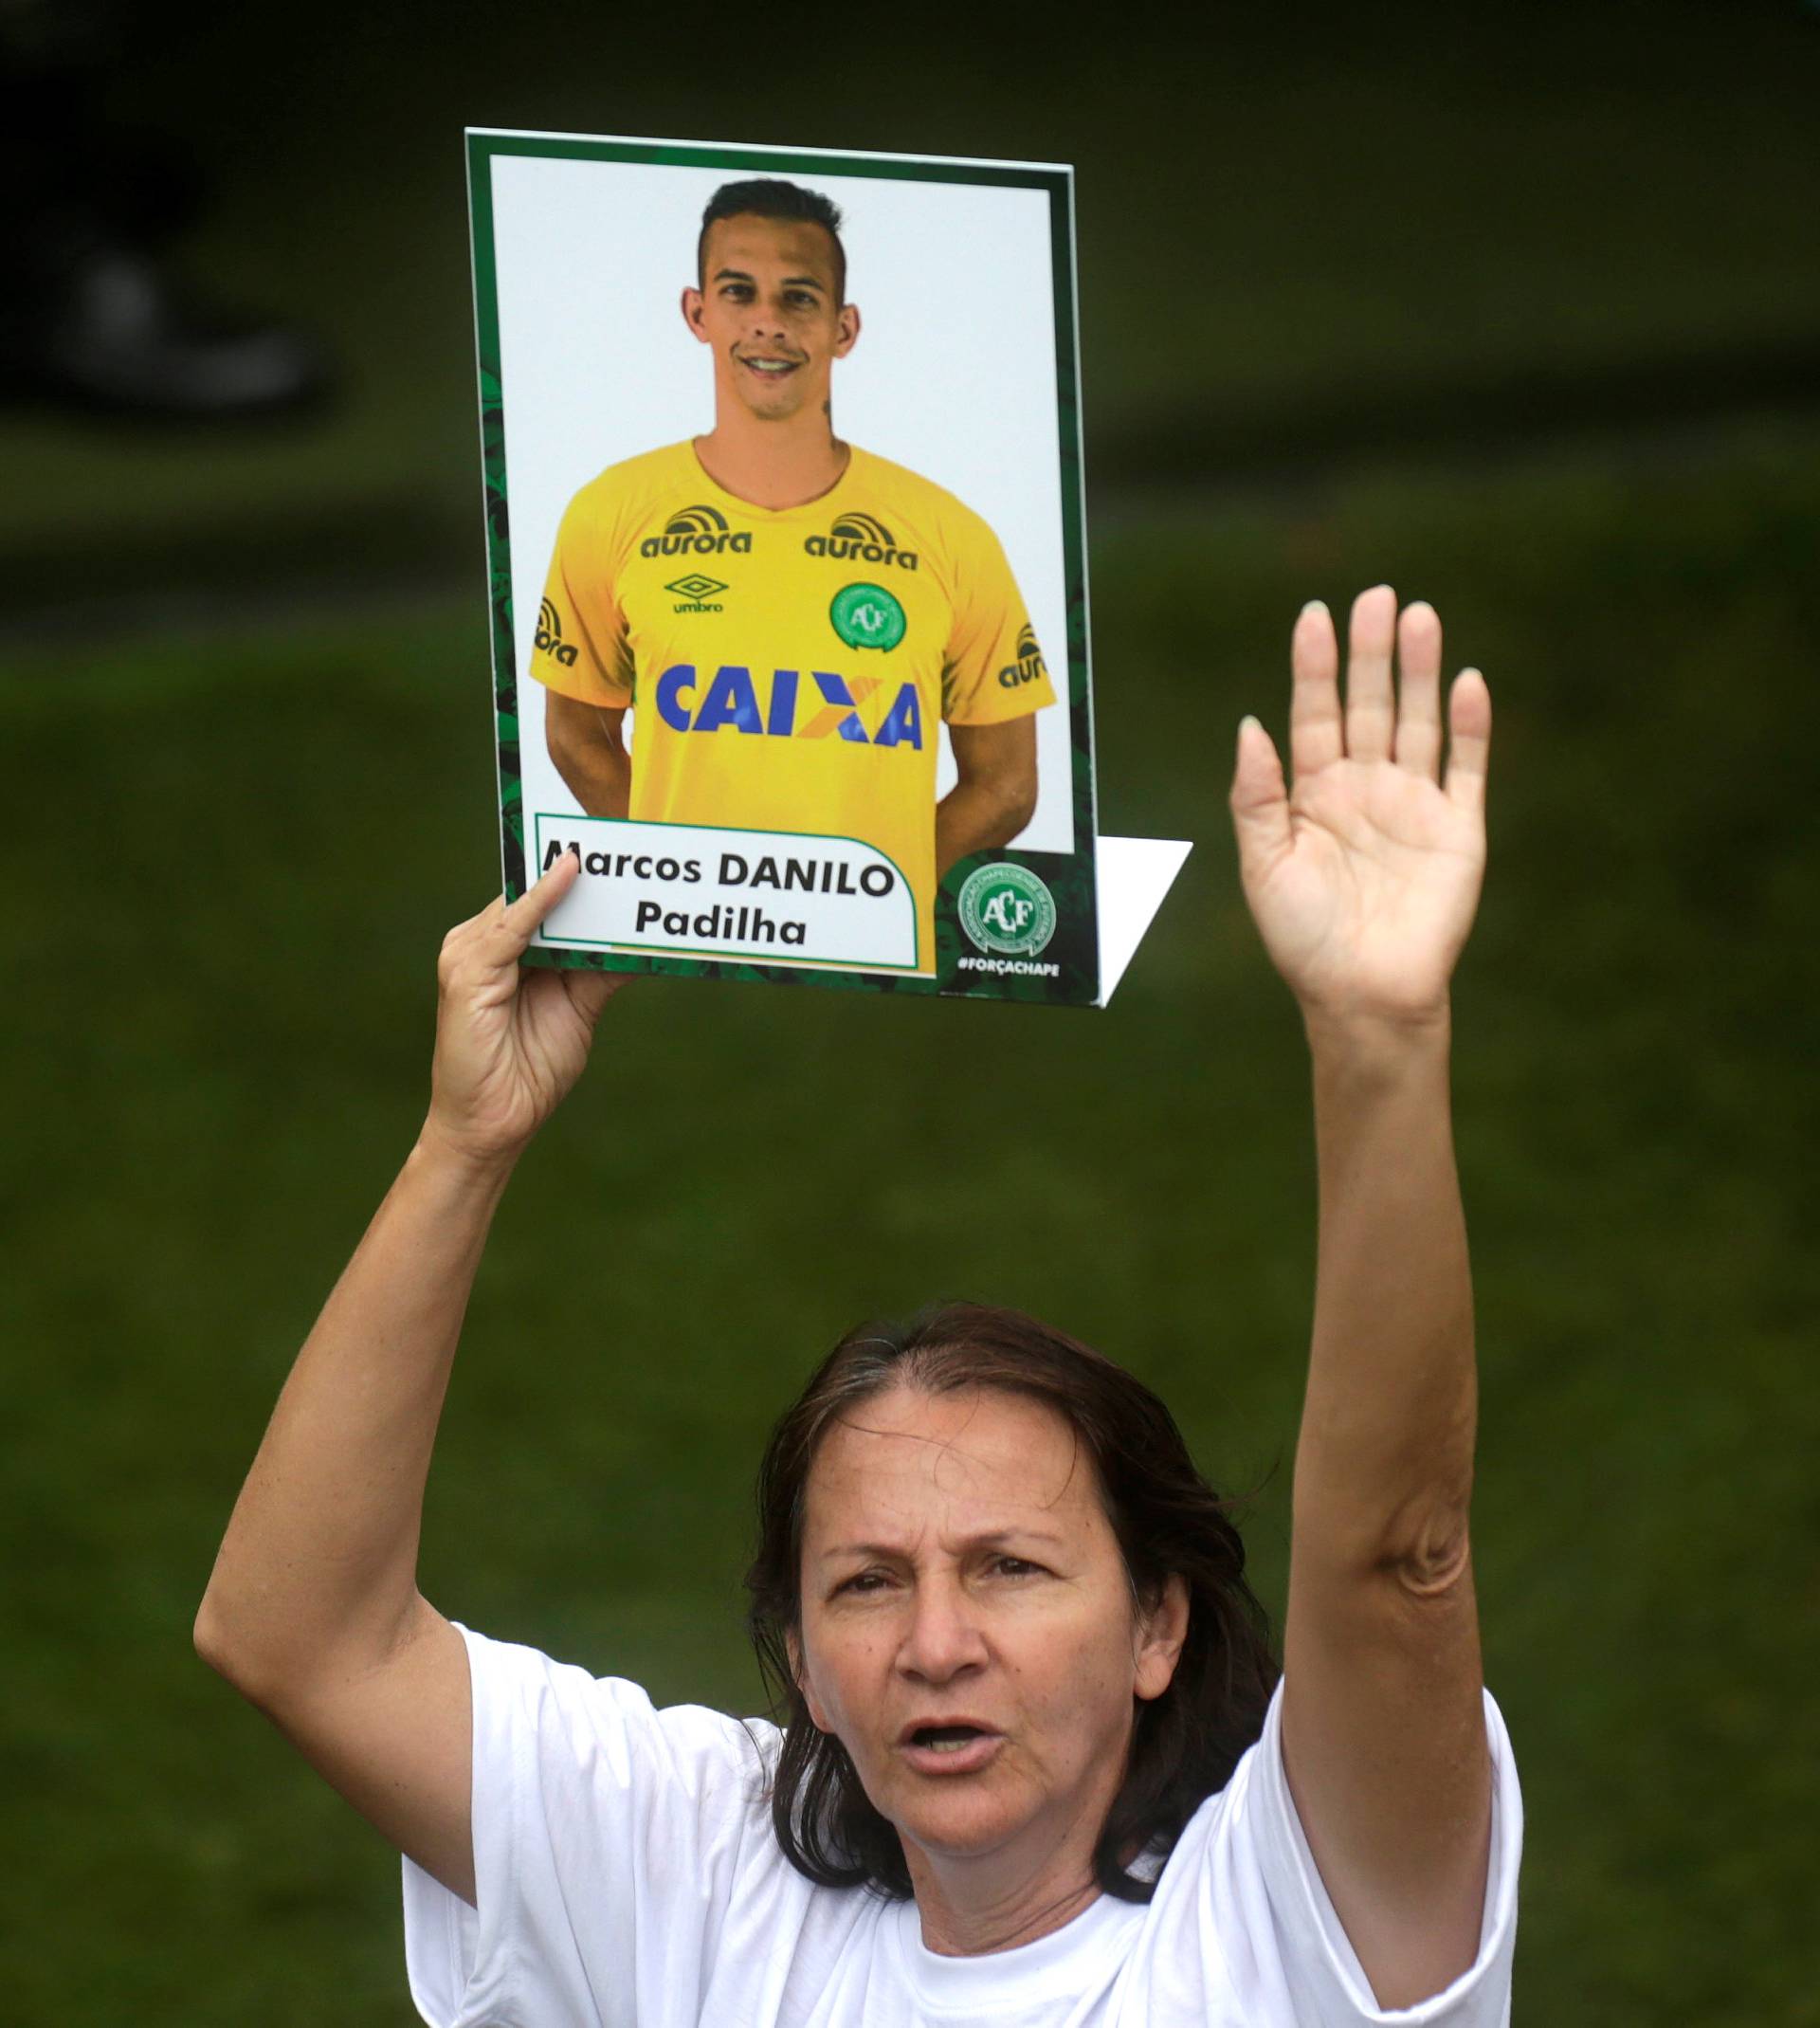 Alaide, mother of Chapecoense goalkeeper Danilo holds a picture of her son who was a victim of the plane crash in Colombia, after a ceremony to pay tribute to Chapecoense players at Arena Conda stadium in Chapeco